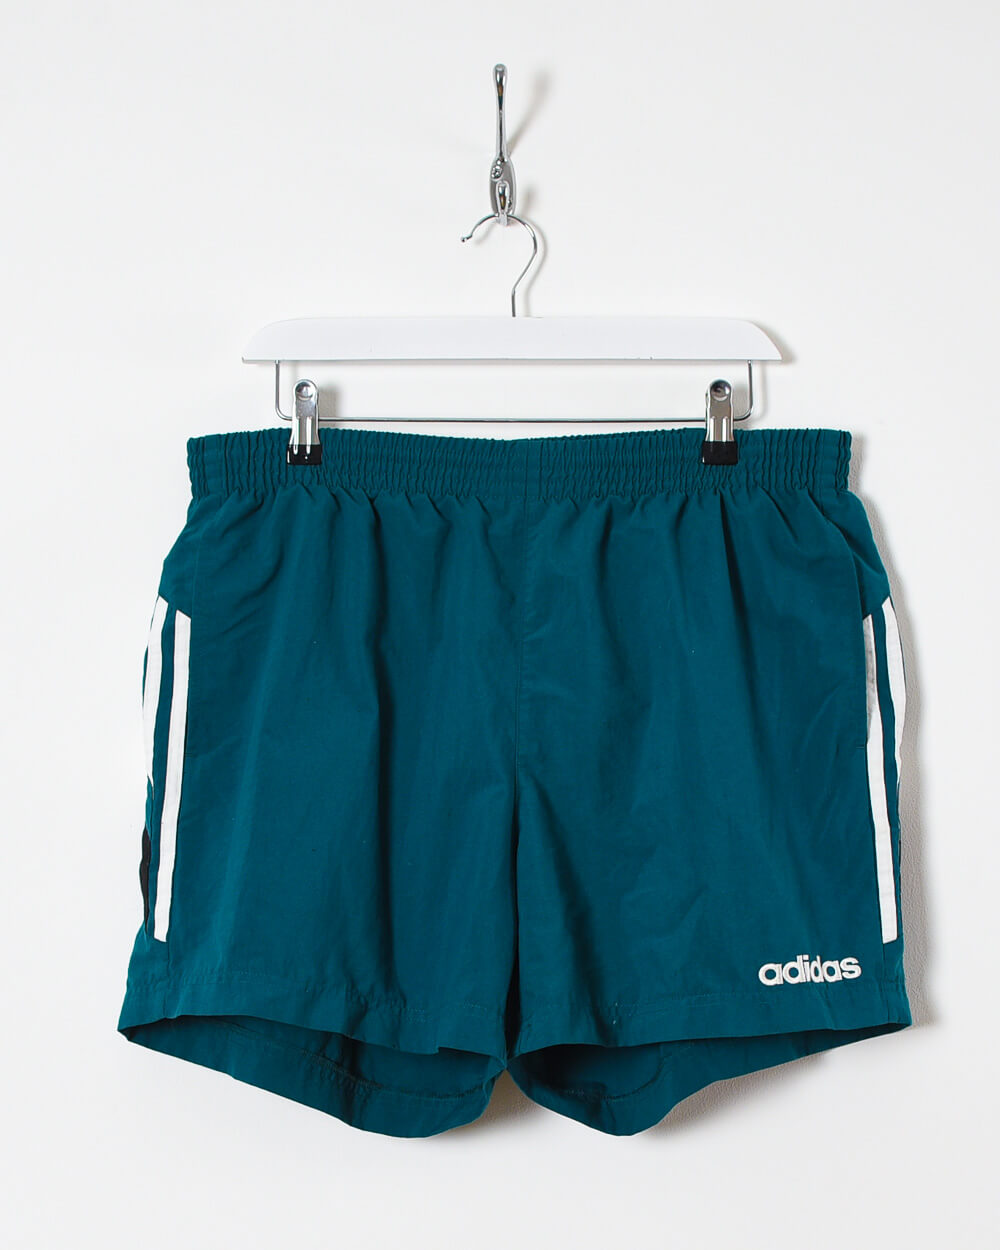 Adidas Shorts - W32 - Domno Vintage 90s, 80s, 00s Retro and Vintage Clothing 